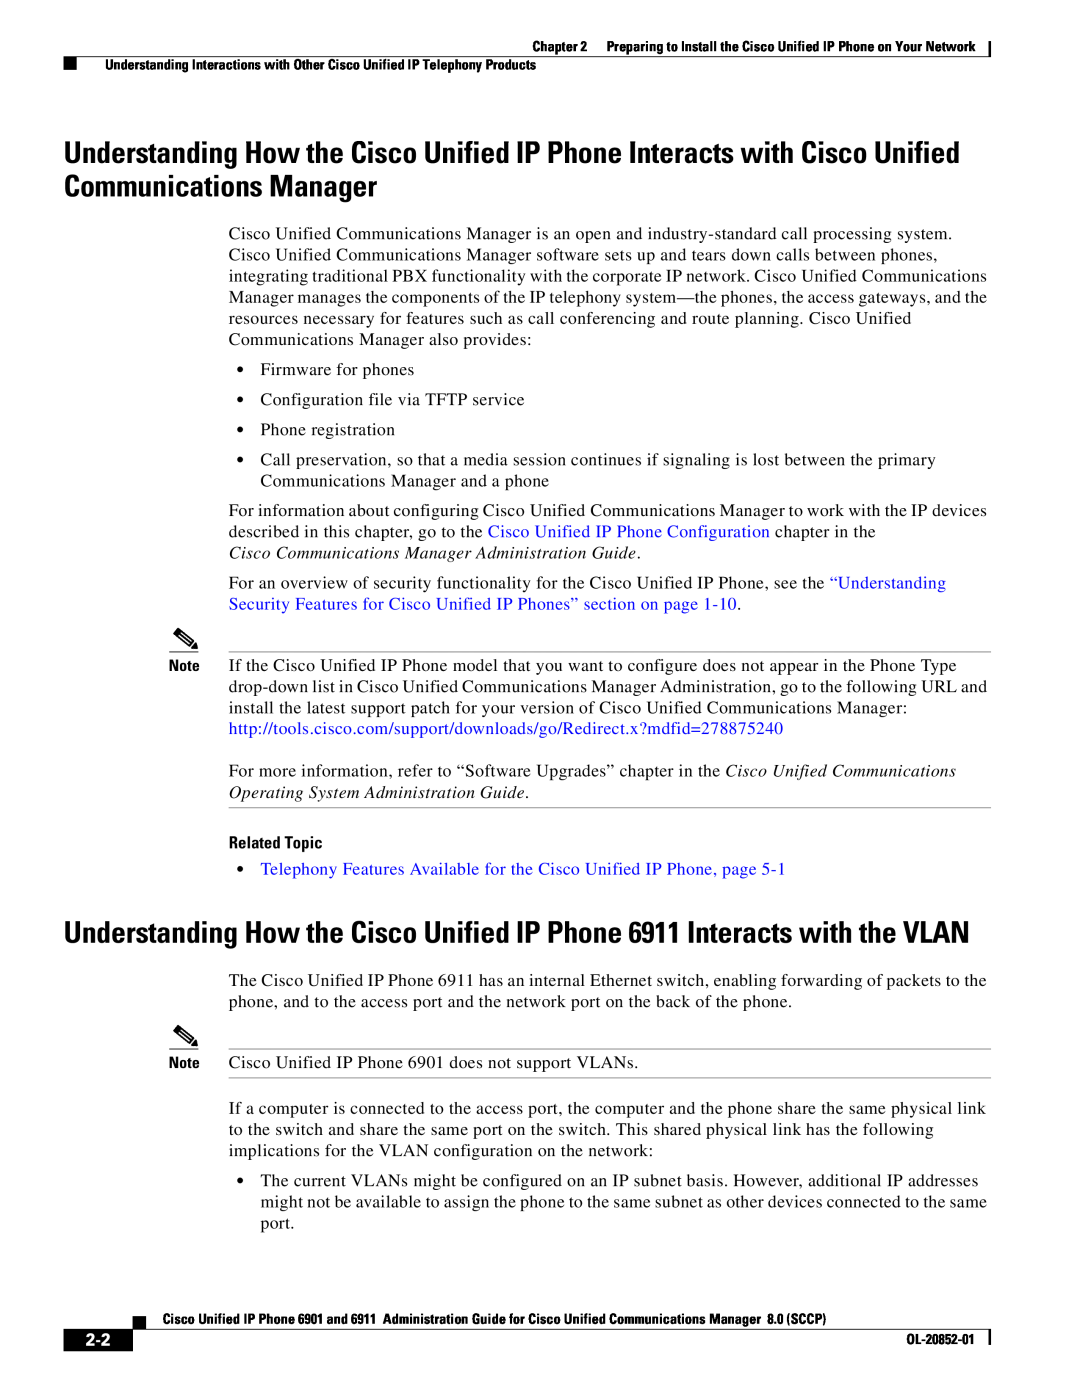 Cisco Systems 691 manual Related Topic, Telephony Features Available for the Cisco Unified IP Phone, page 